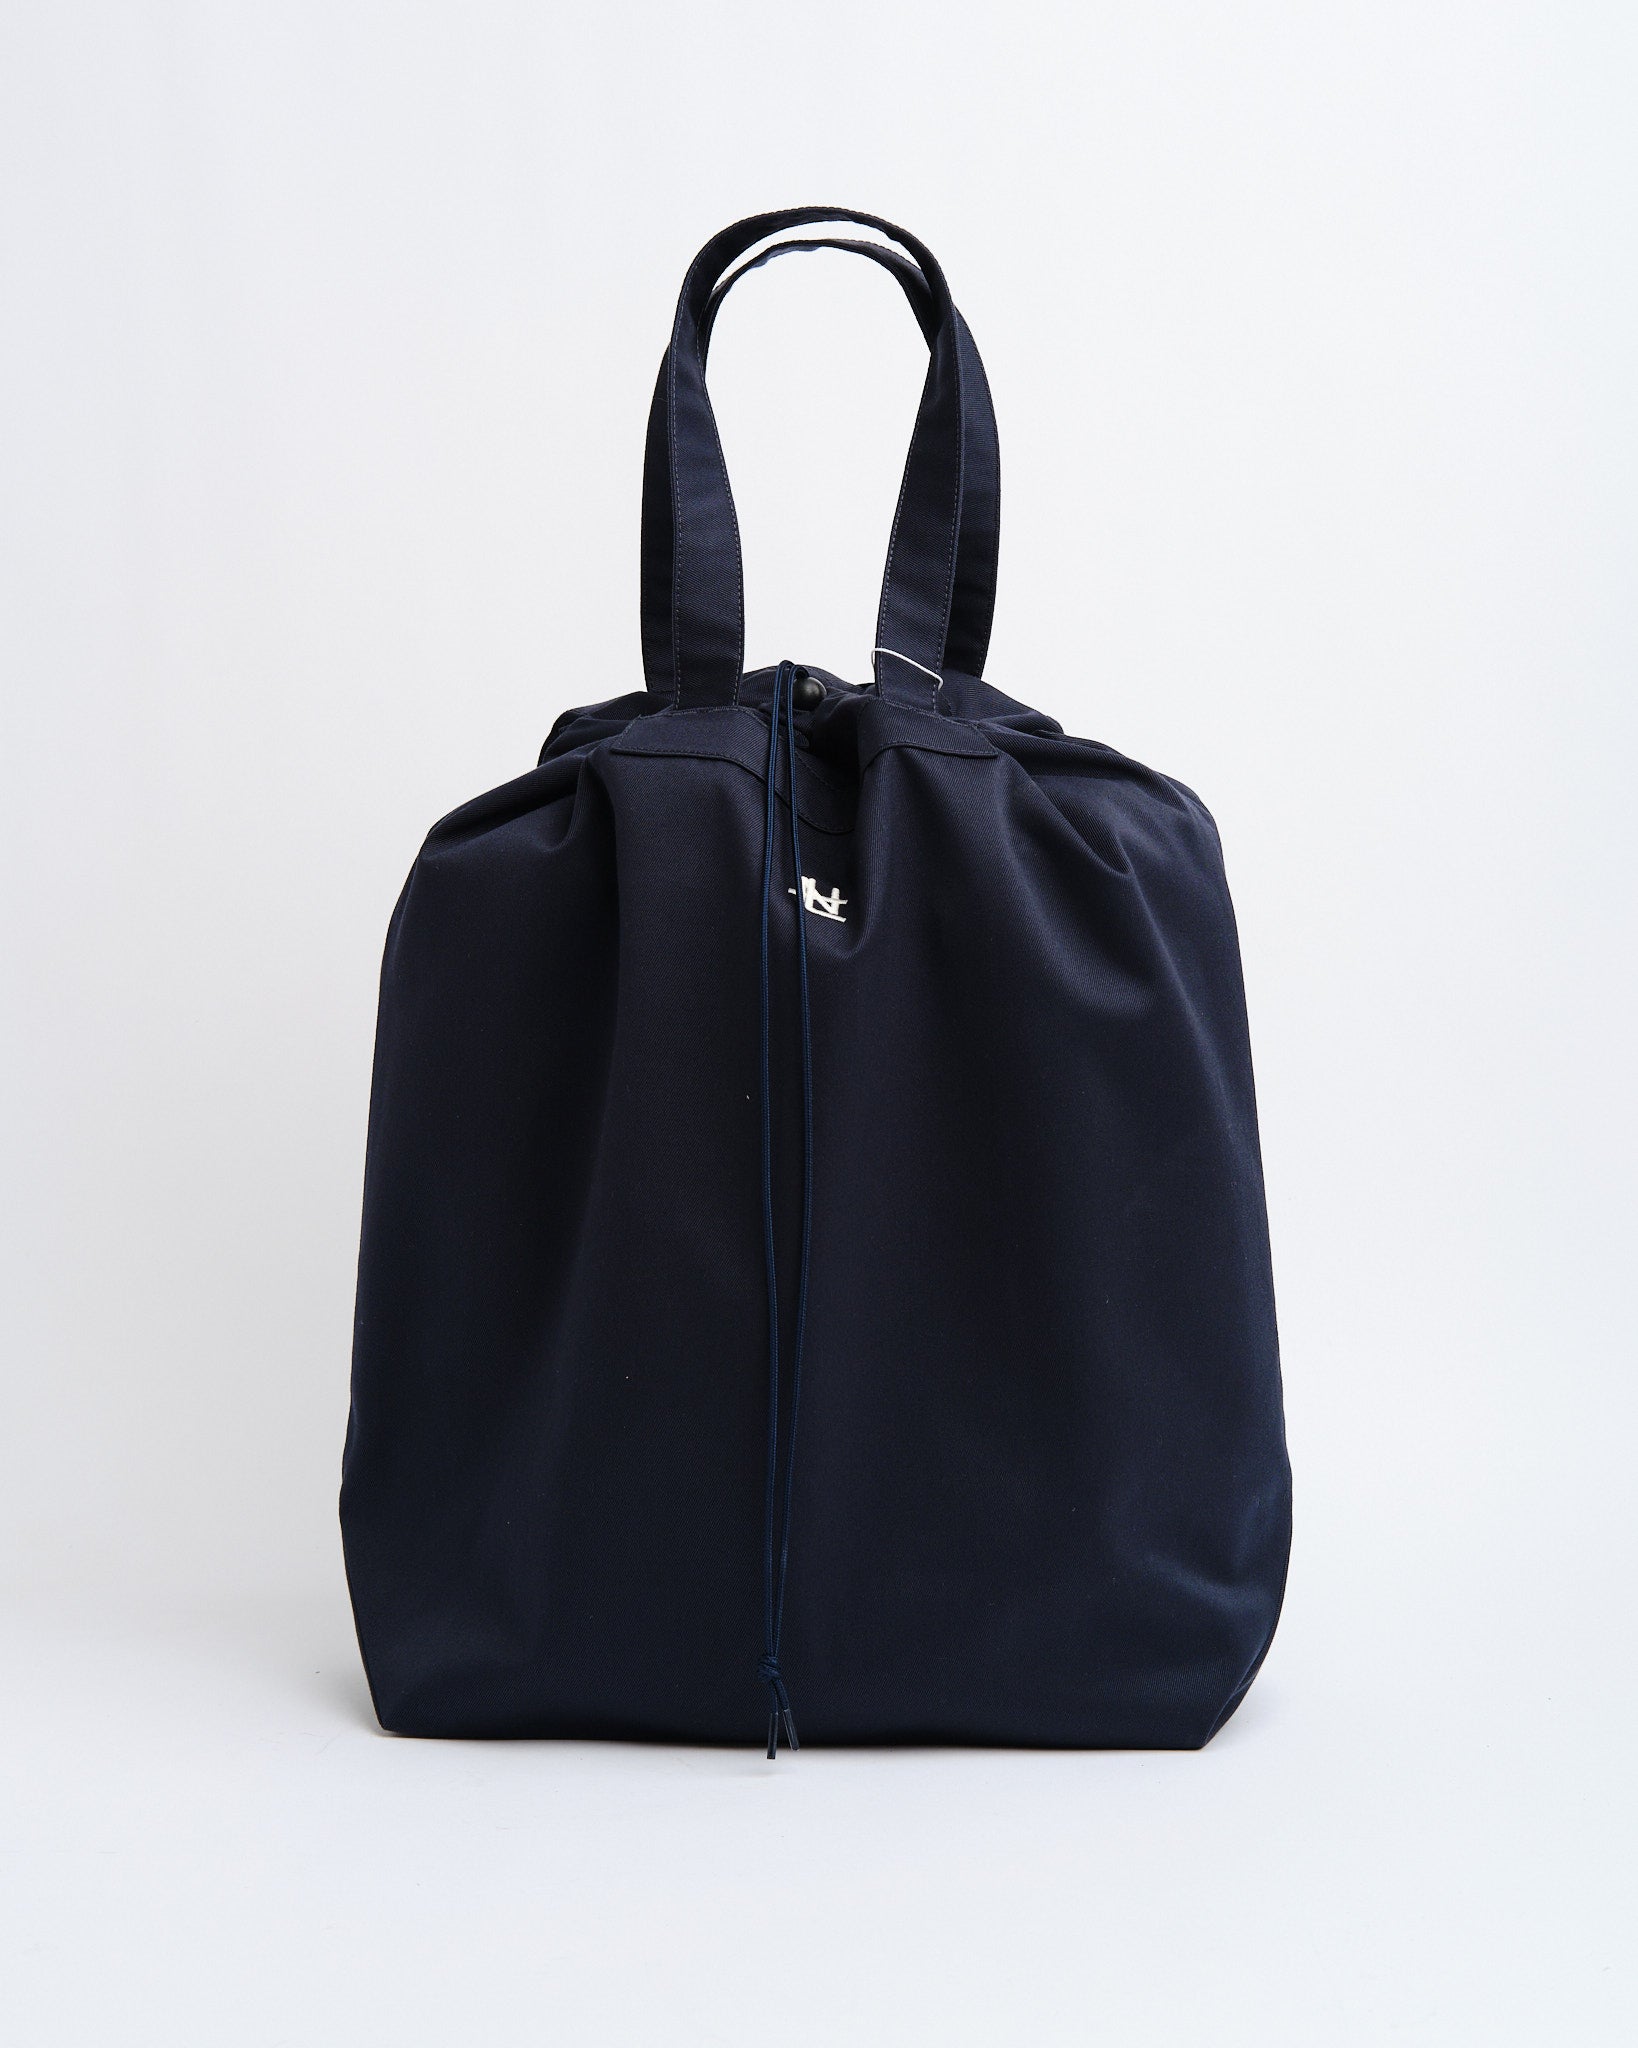 Chino Tote Bag Navy - Meadow